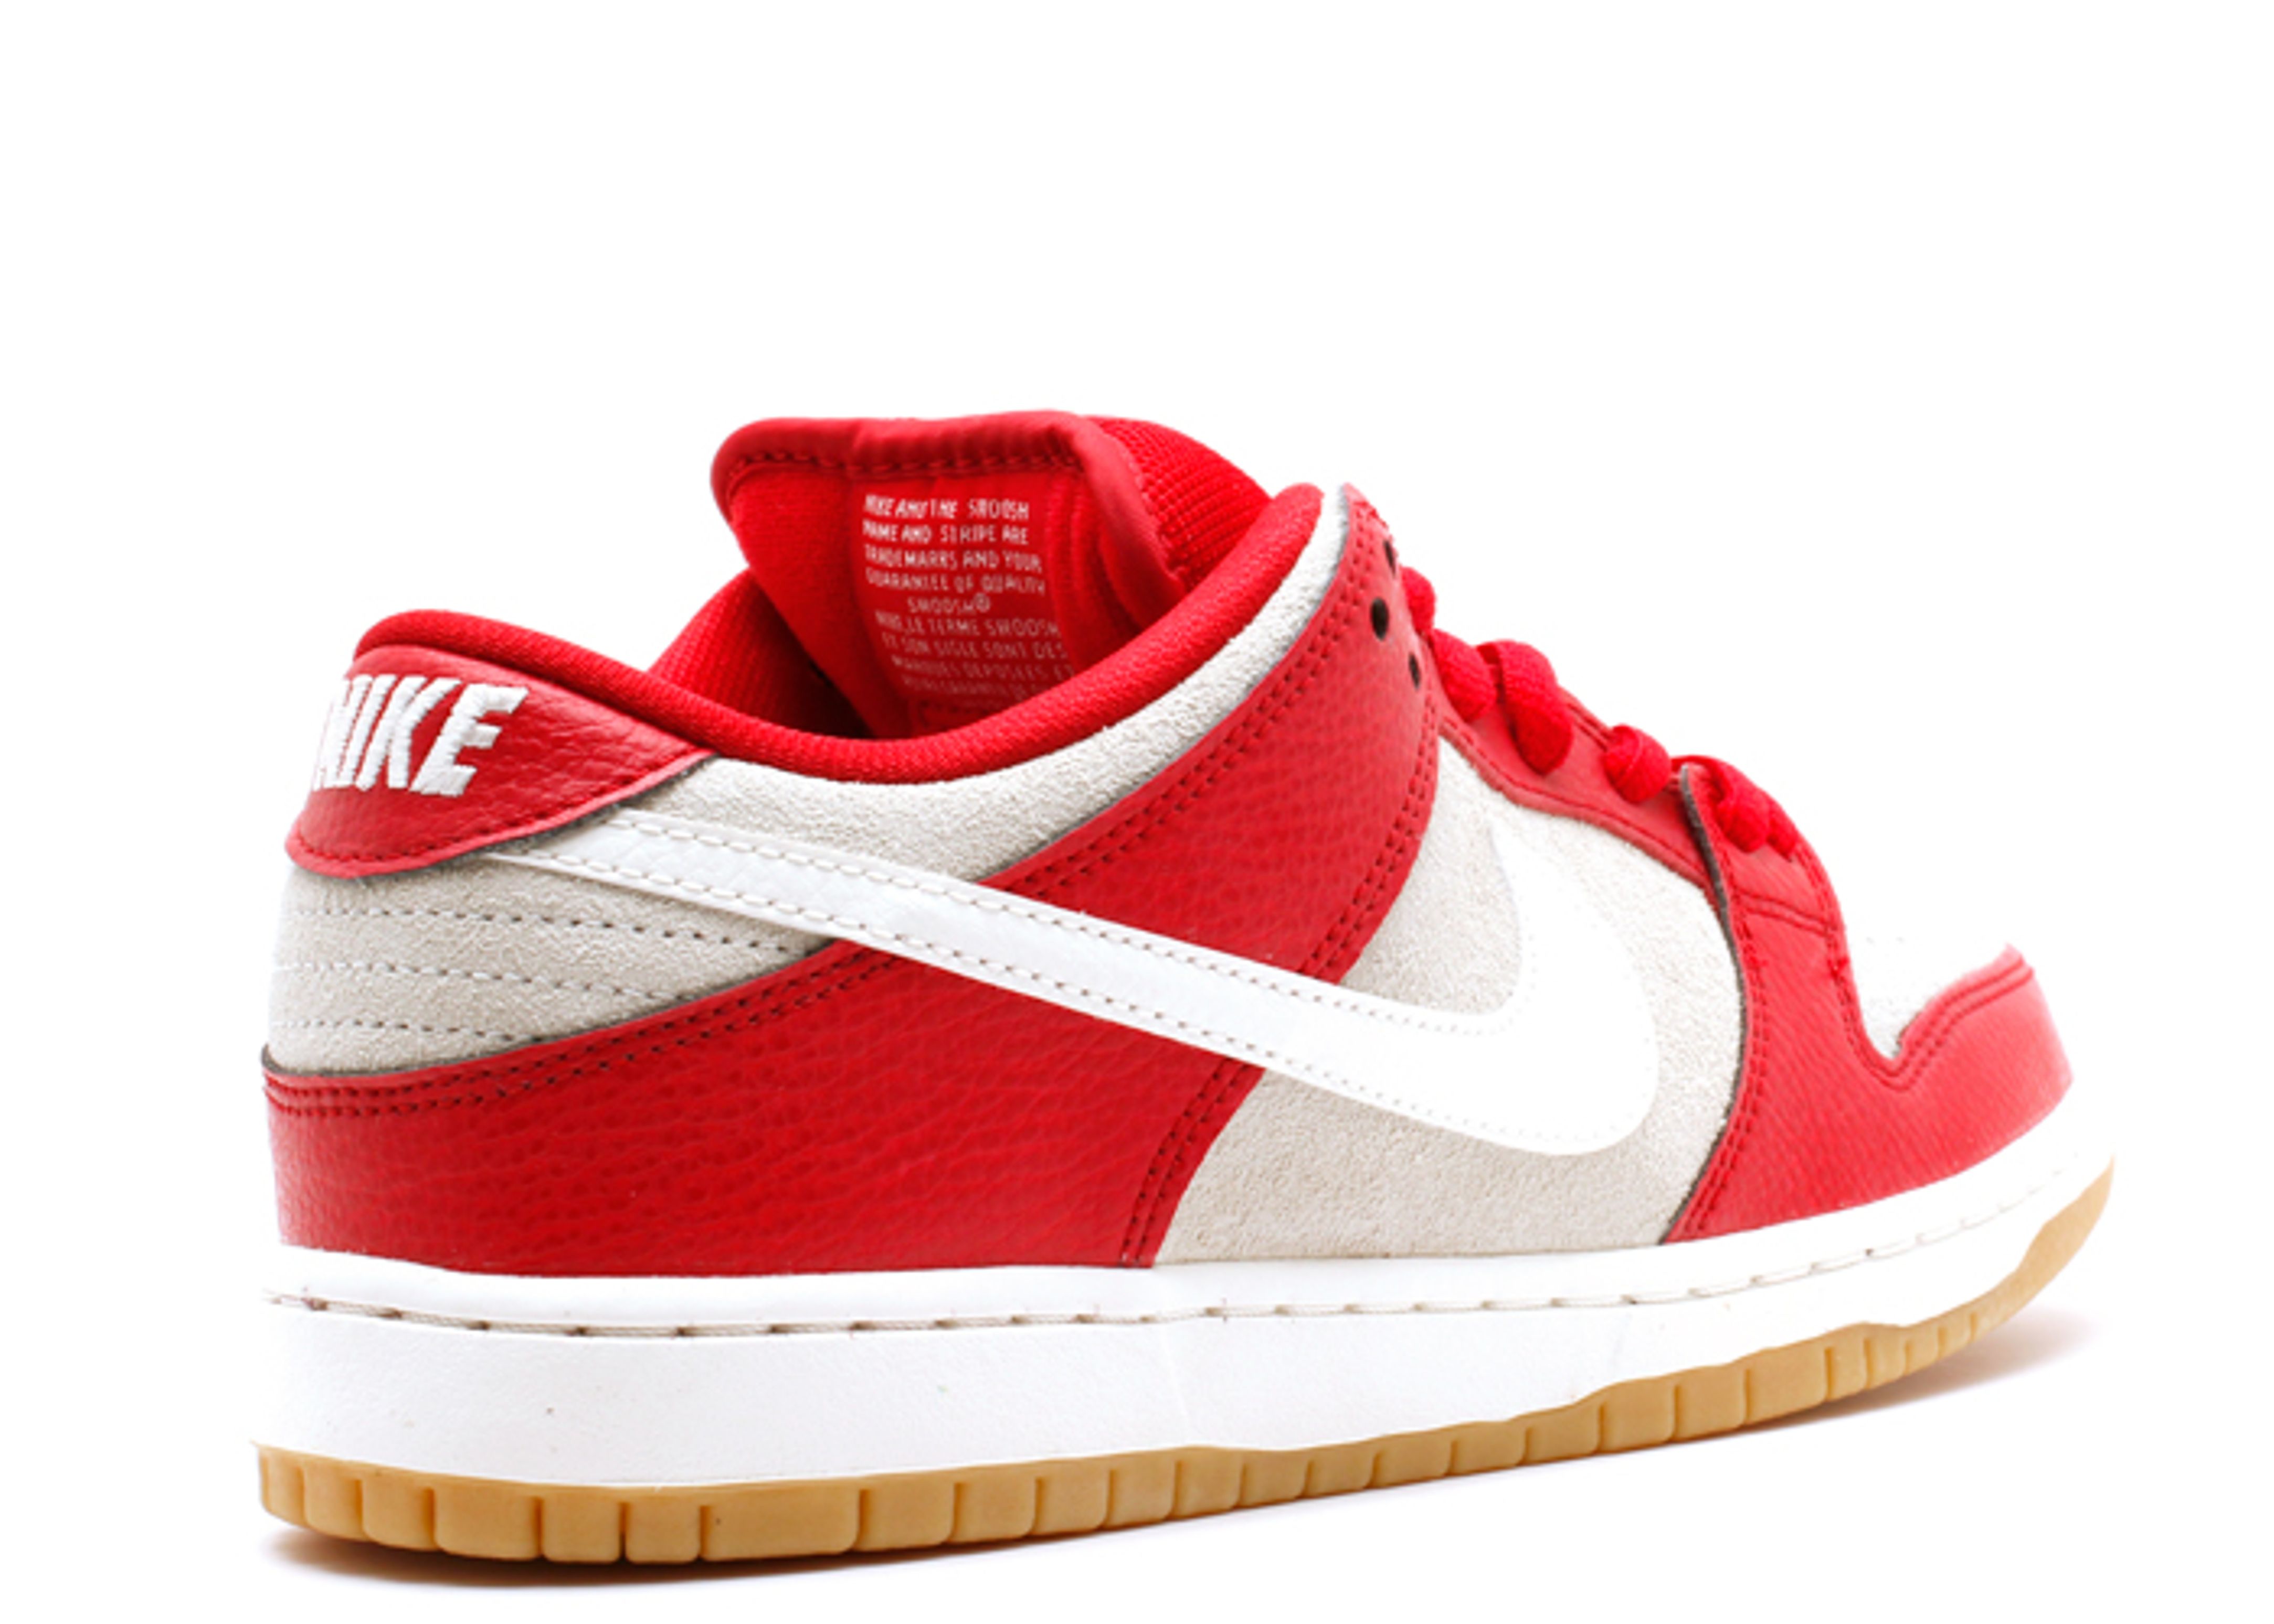 Dunk Low Pro SB 'Valentines Day' - Nike - 304292 612 - gym red/gum 